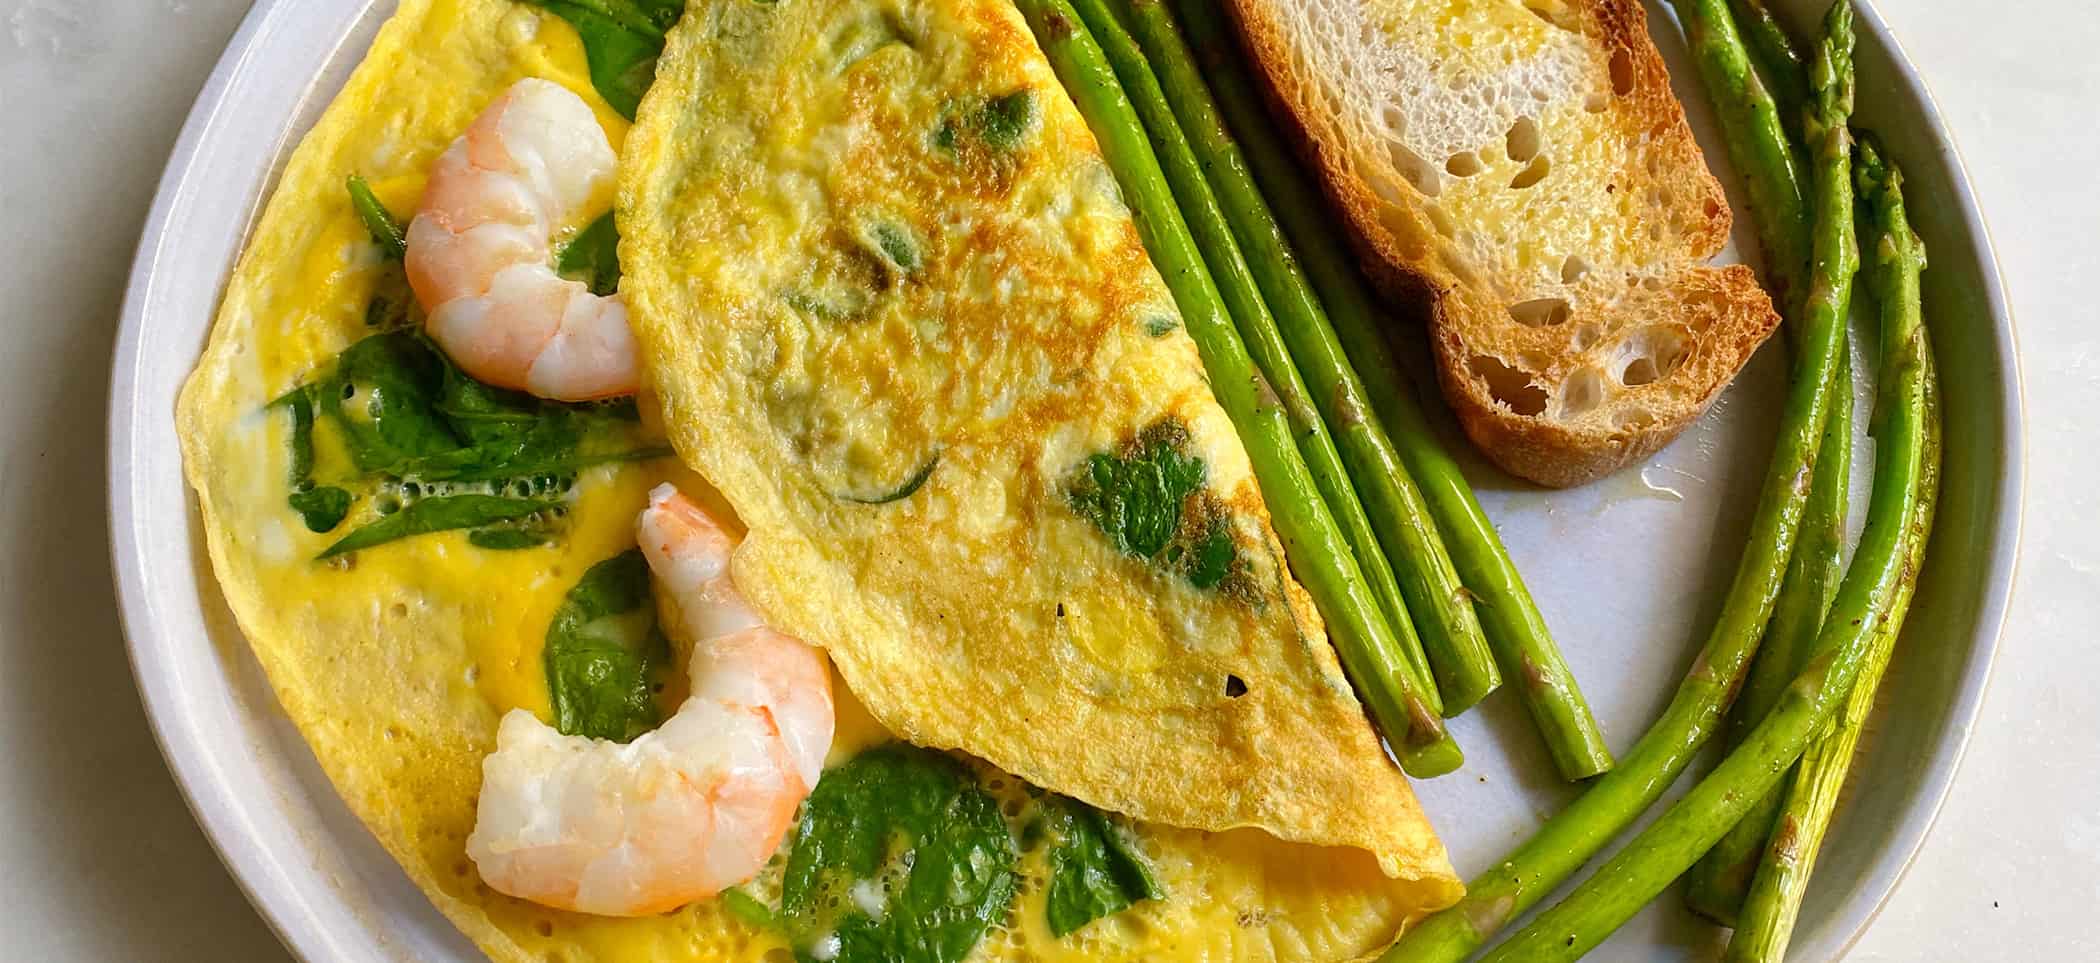 Shrimp And Spinach Omelette